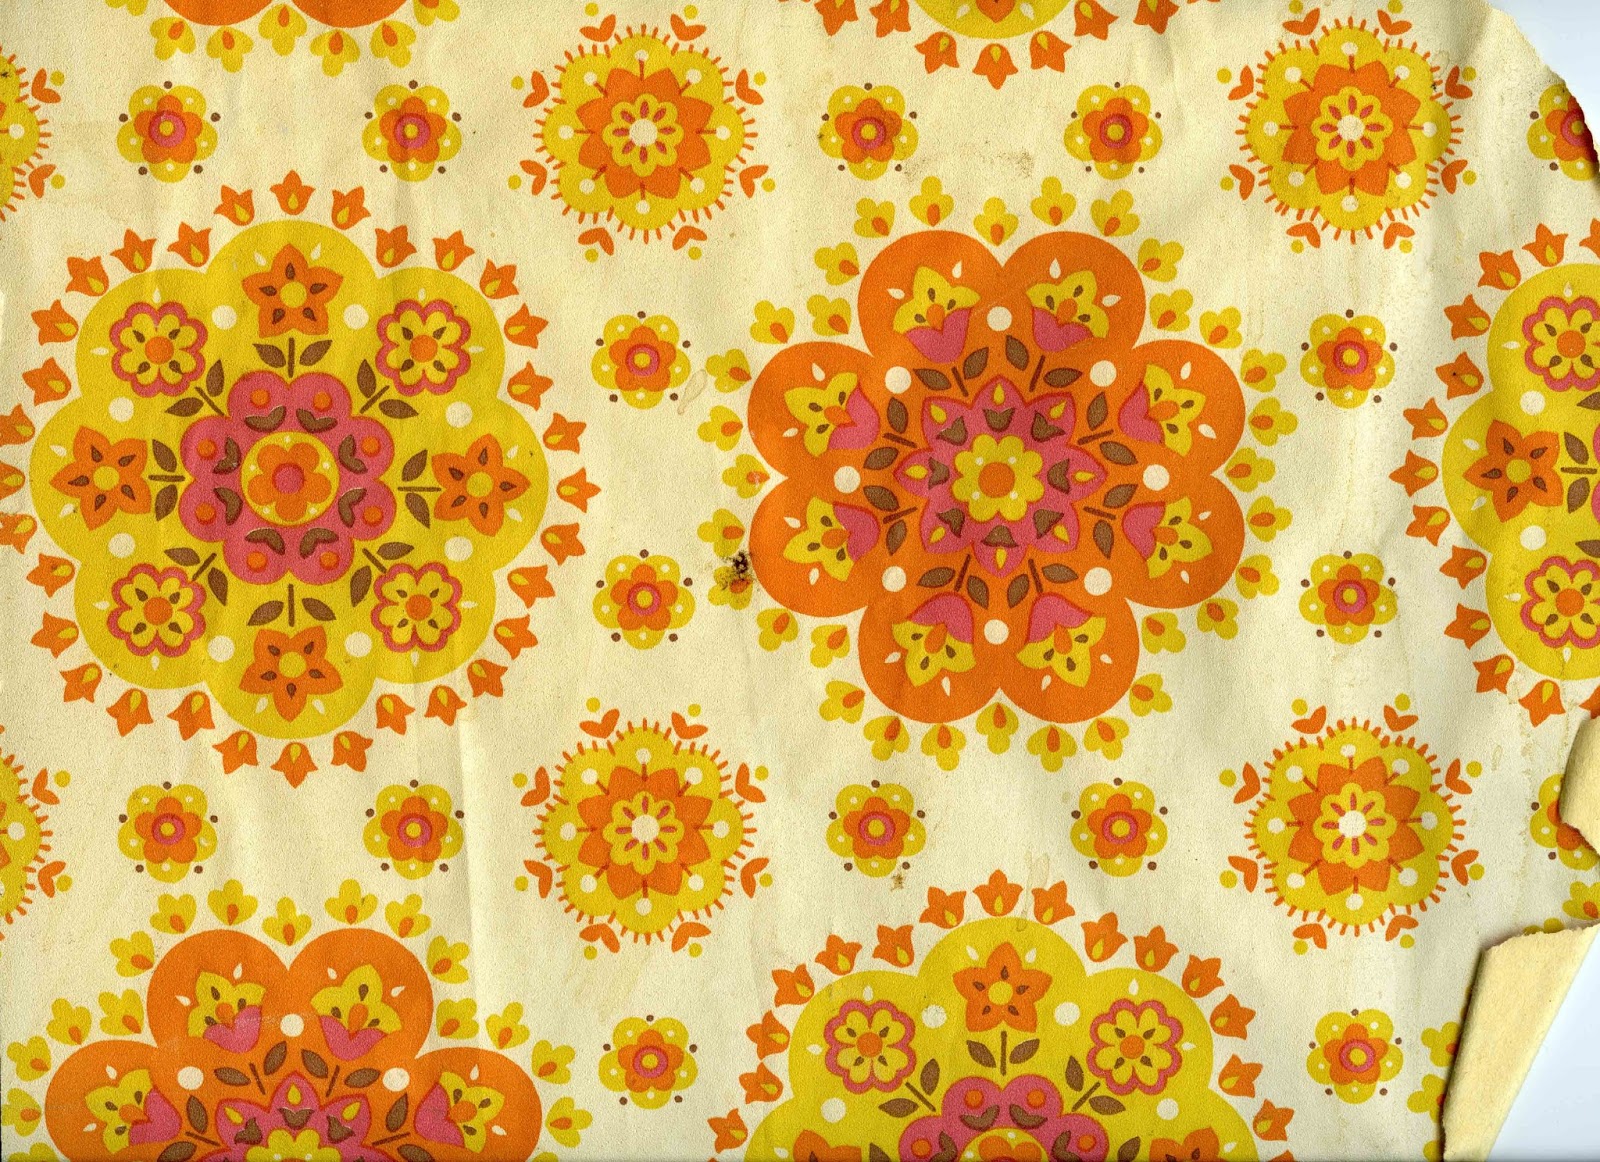 http://2.bp.blogspot.com/-bsVtXI-LxaM/UPPTI16-gFI/AAAAAAAAAYg/Y661xEMJyyg/s1600/wallpaper-60s-70s-yellow-orange-floral-circular-pattern-design-on-wall-of-house-built-in-about-1970-fading-and-tattered-rotated-5-DHD.jpg